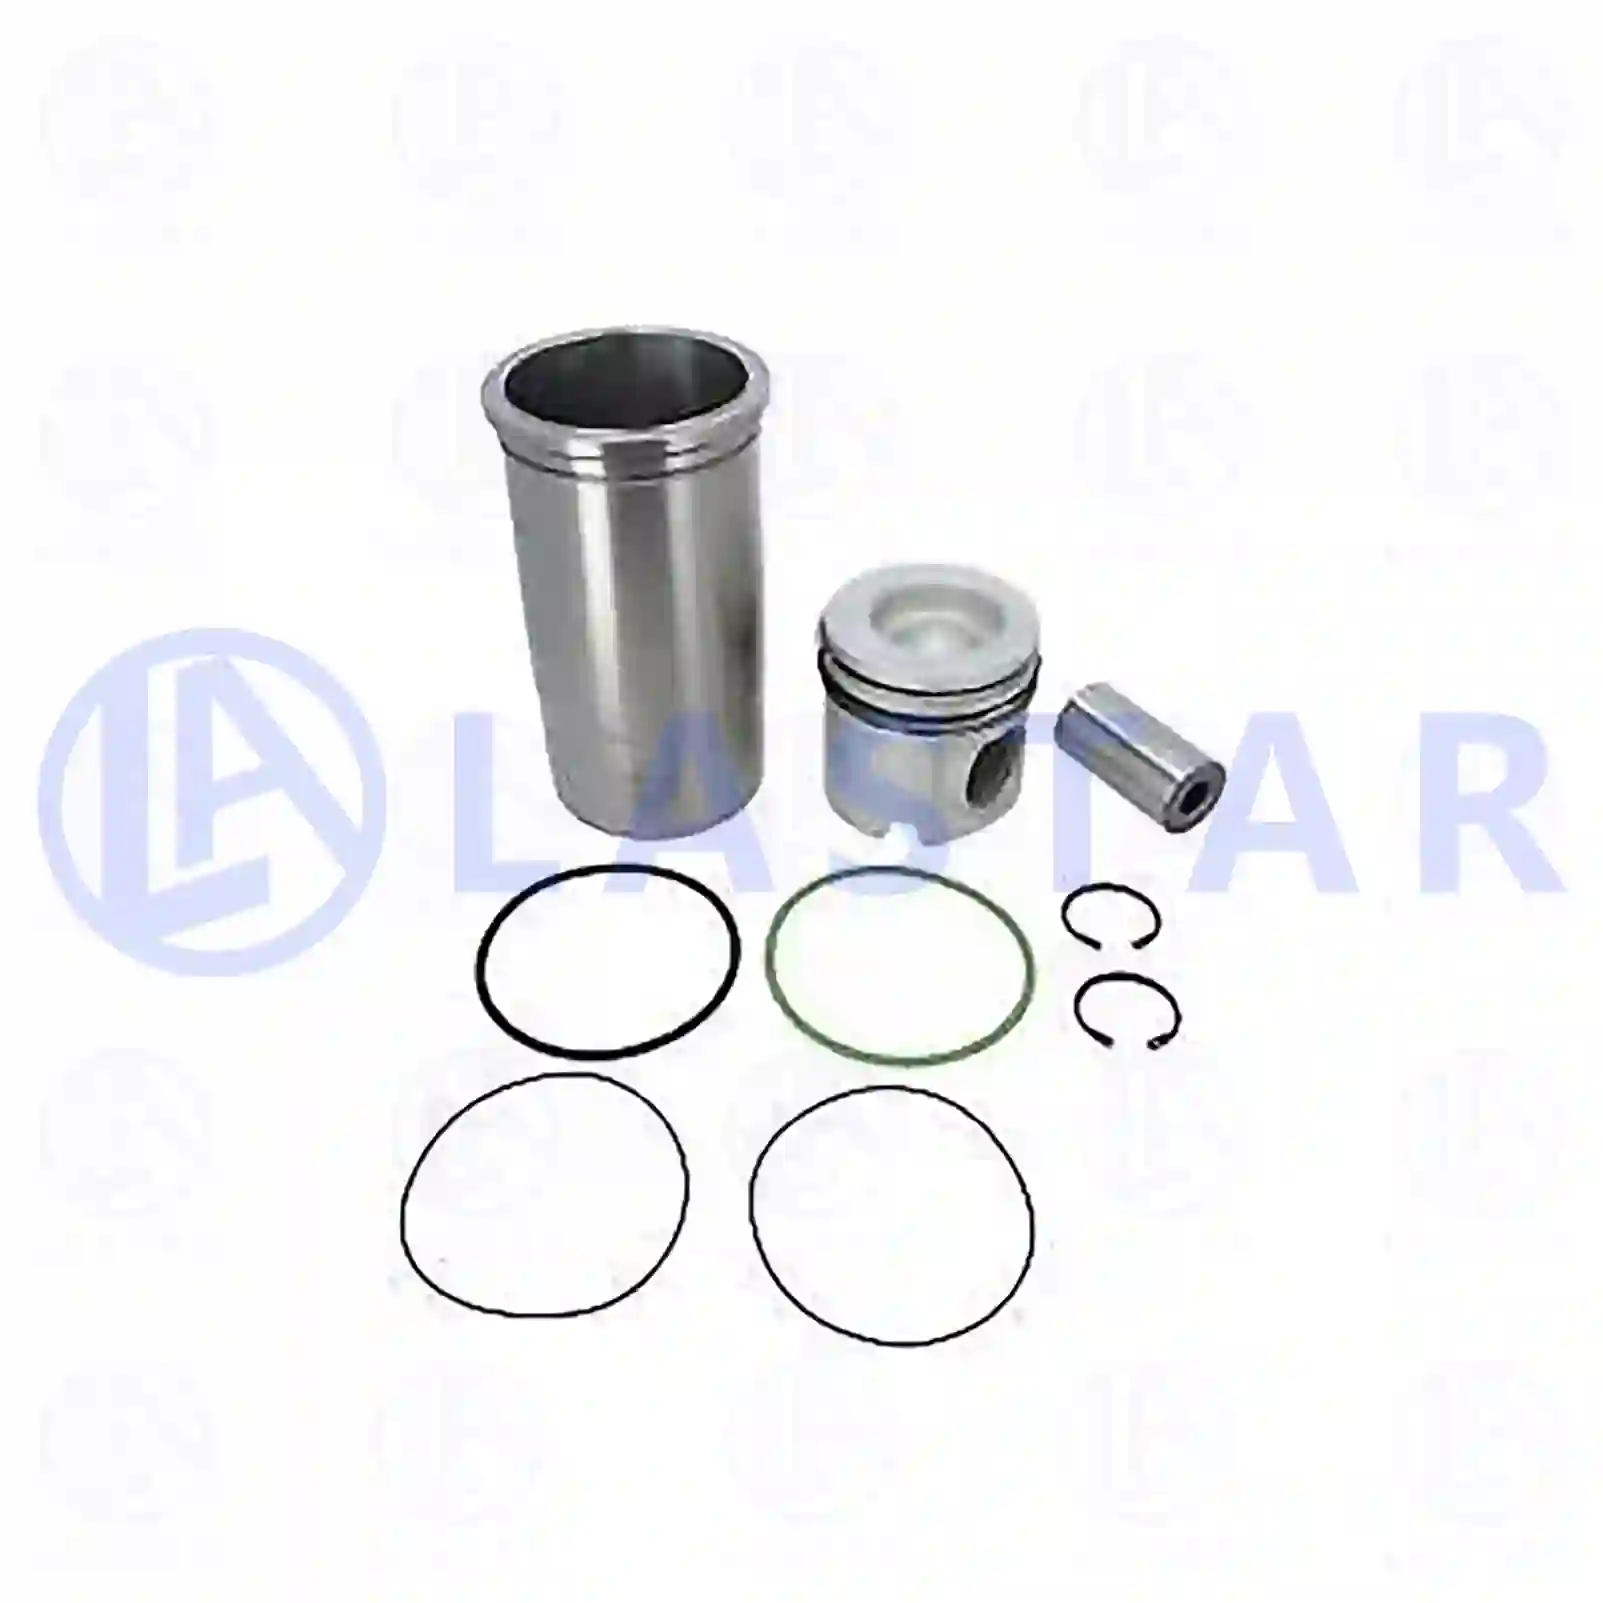 Piston with liner, 77700116, 5001855845, 50018 ||  77700116 Lastar Spare Part | Truck Spare Parts, Auotomotive Spare Parts Piston with liner, 77700116, 5001855845, 50018 ||  77700116 Lastar Spare Part | Truck Spare Parts, Auotomotive Spare Parts